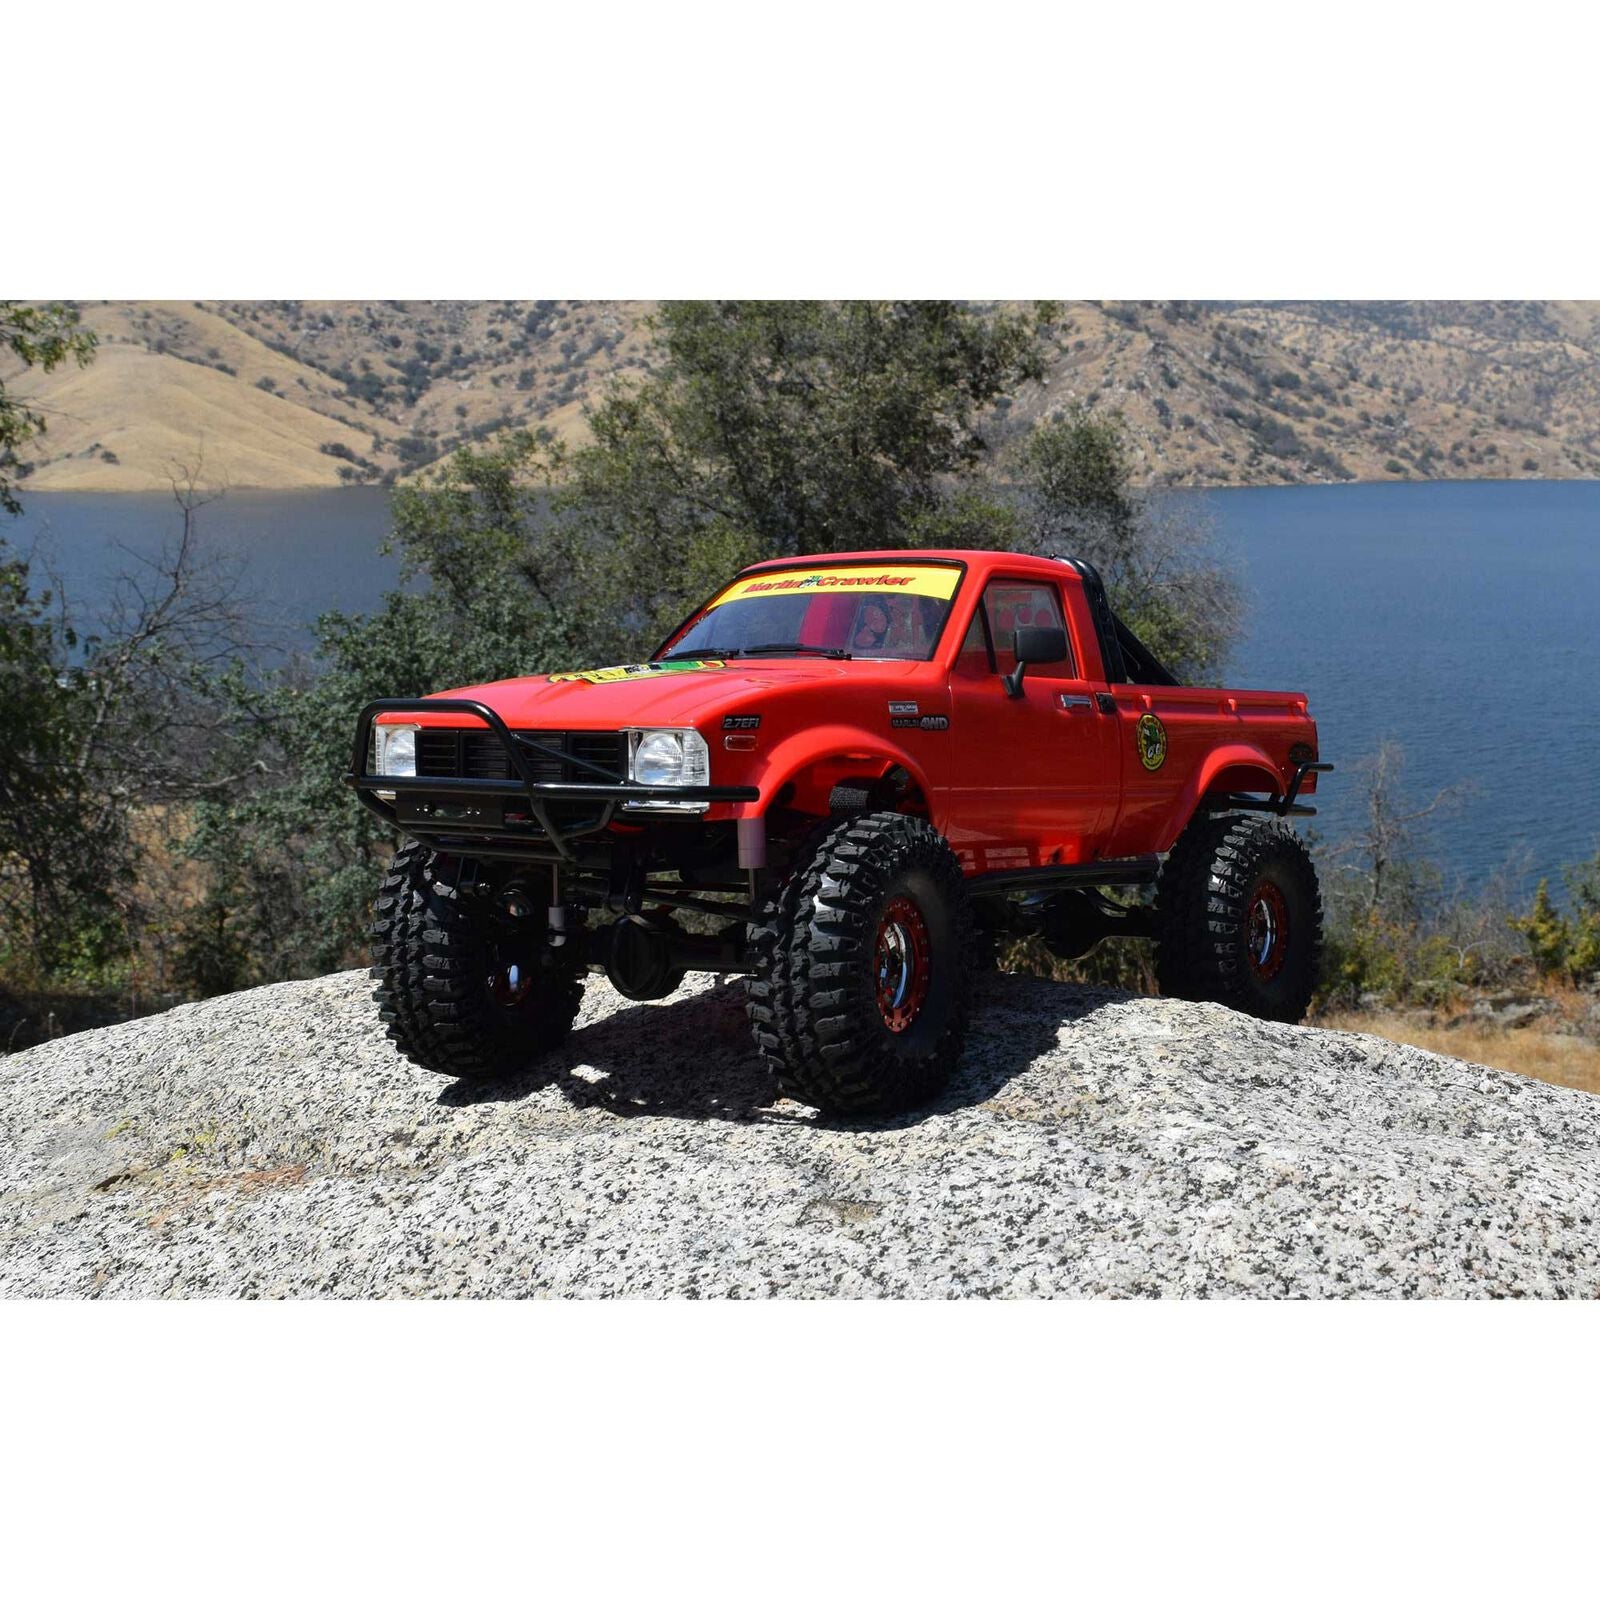 RC4WD Z-RTR0034 1/10 Trail Finder 2 Marlin 4WD Crawler Edition Truck Brushed RTR